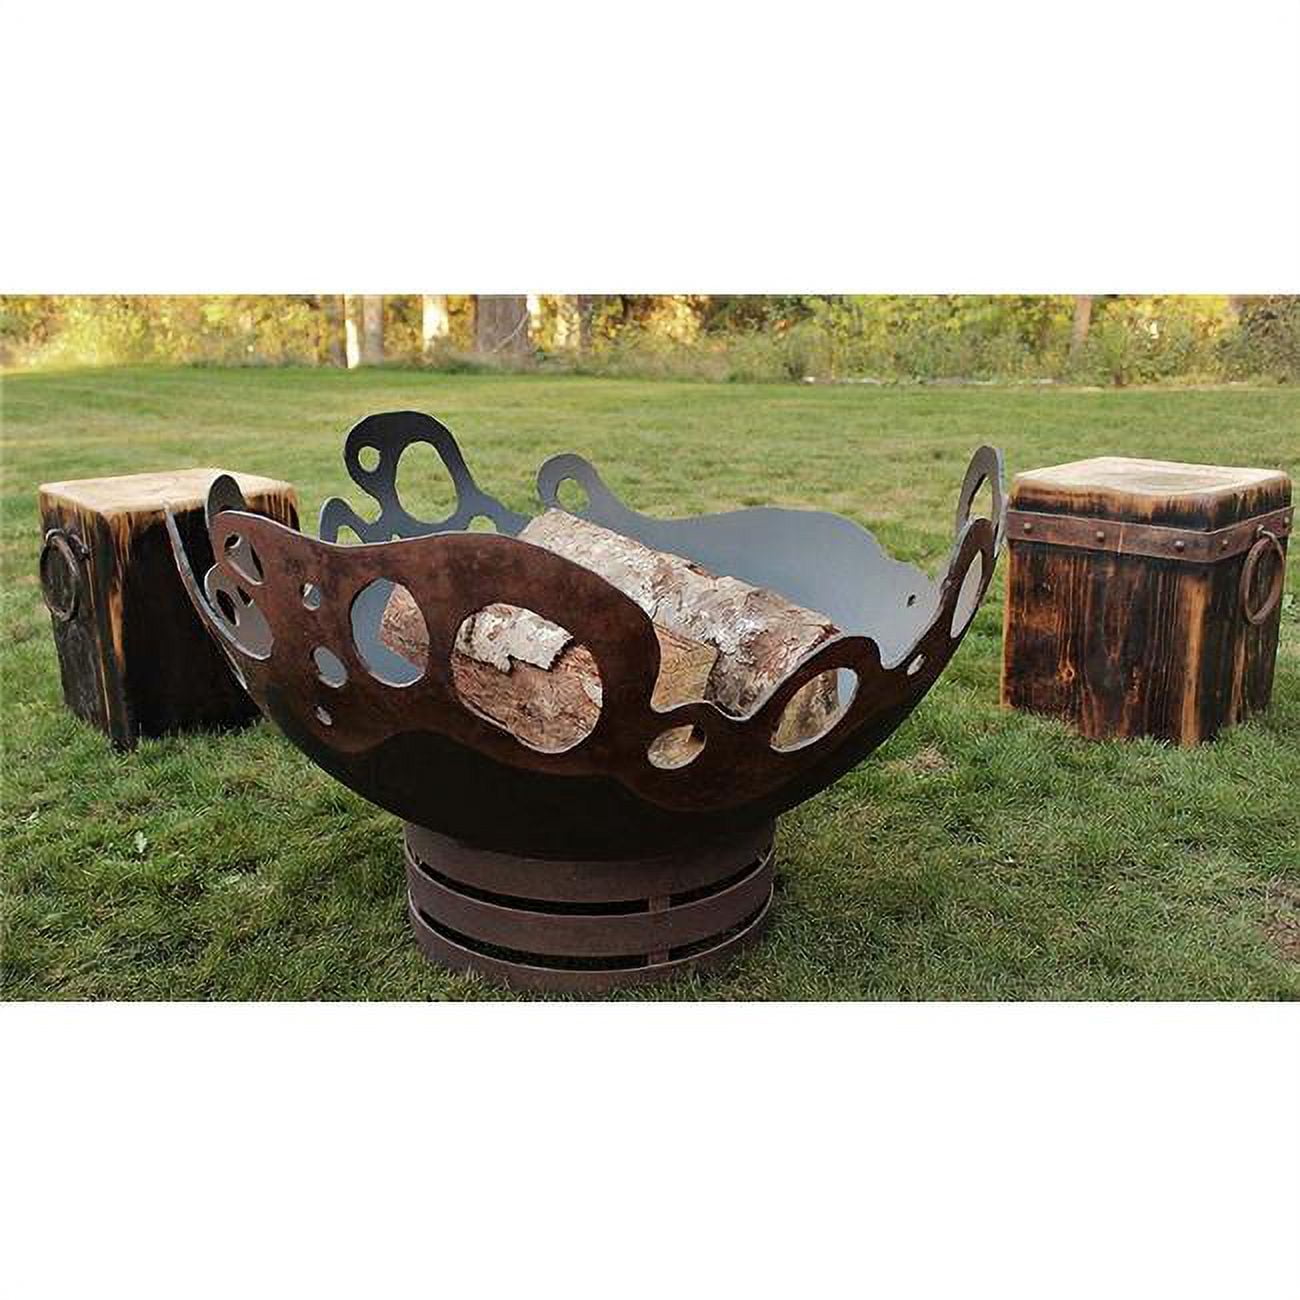 20008-lpei Riptide Propane Electronic Ignition Propane Fire Pit